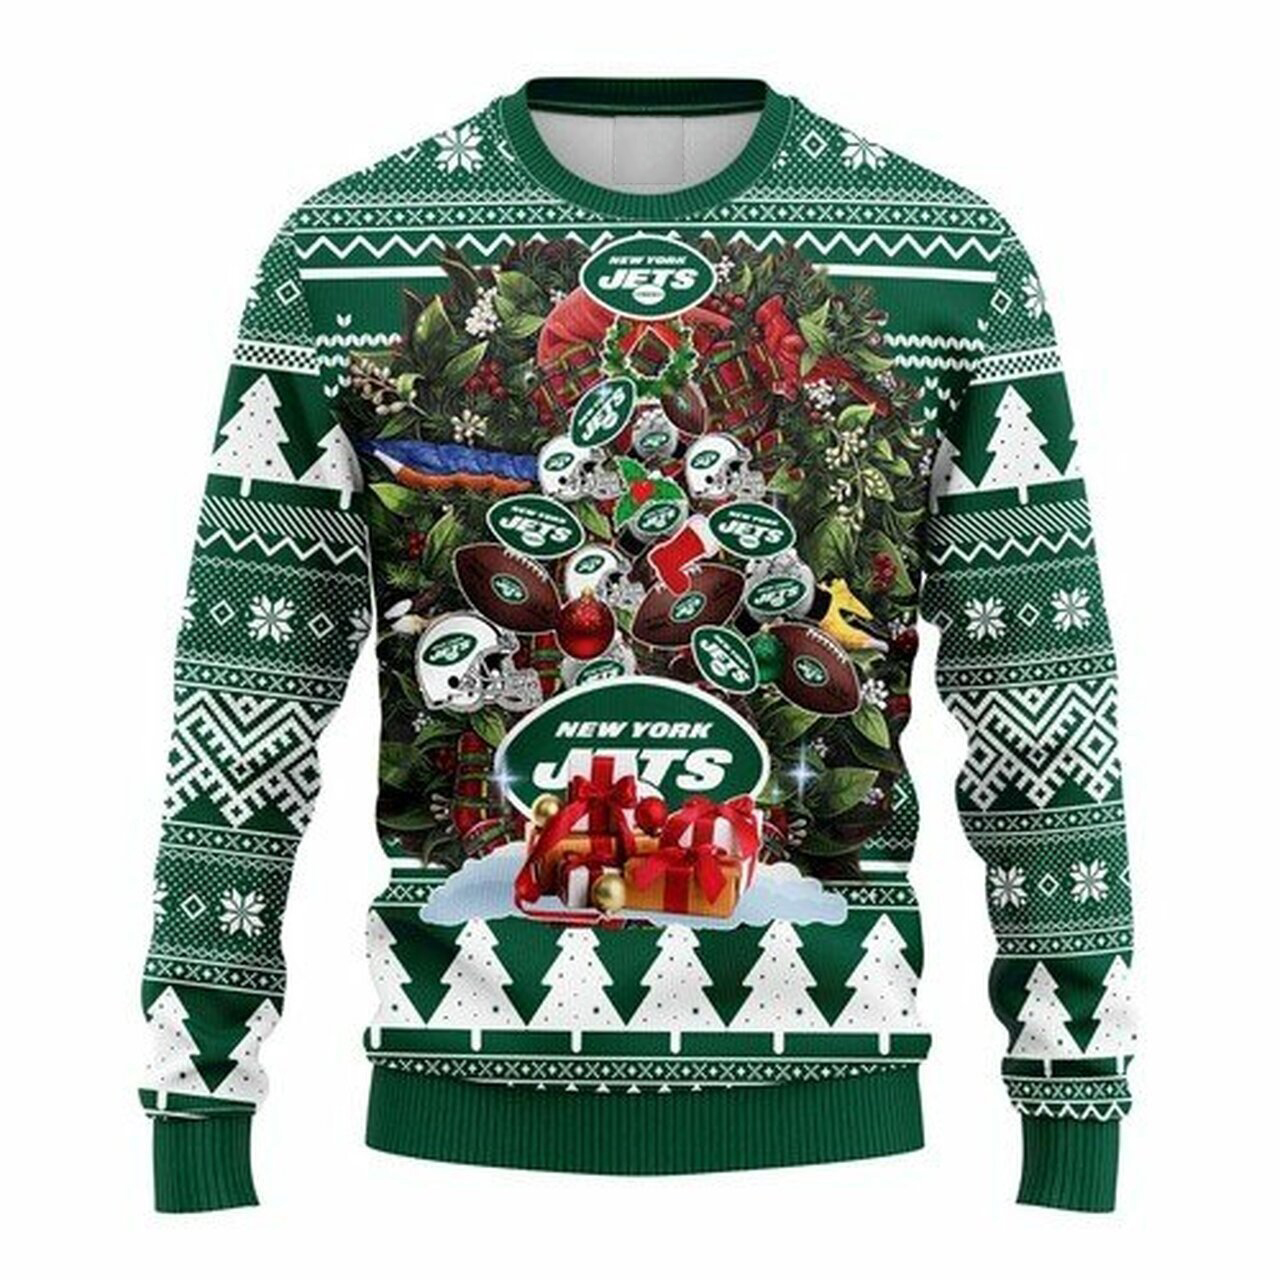 NFL New York Jets christmas tree ugly sweater